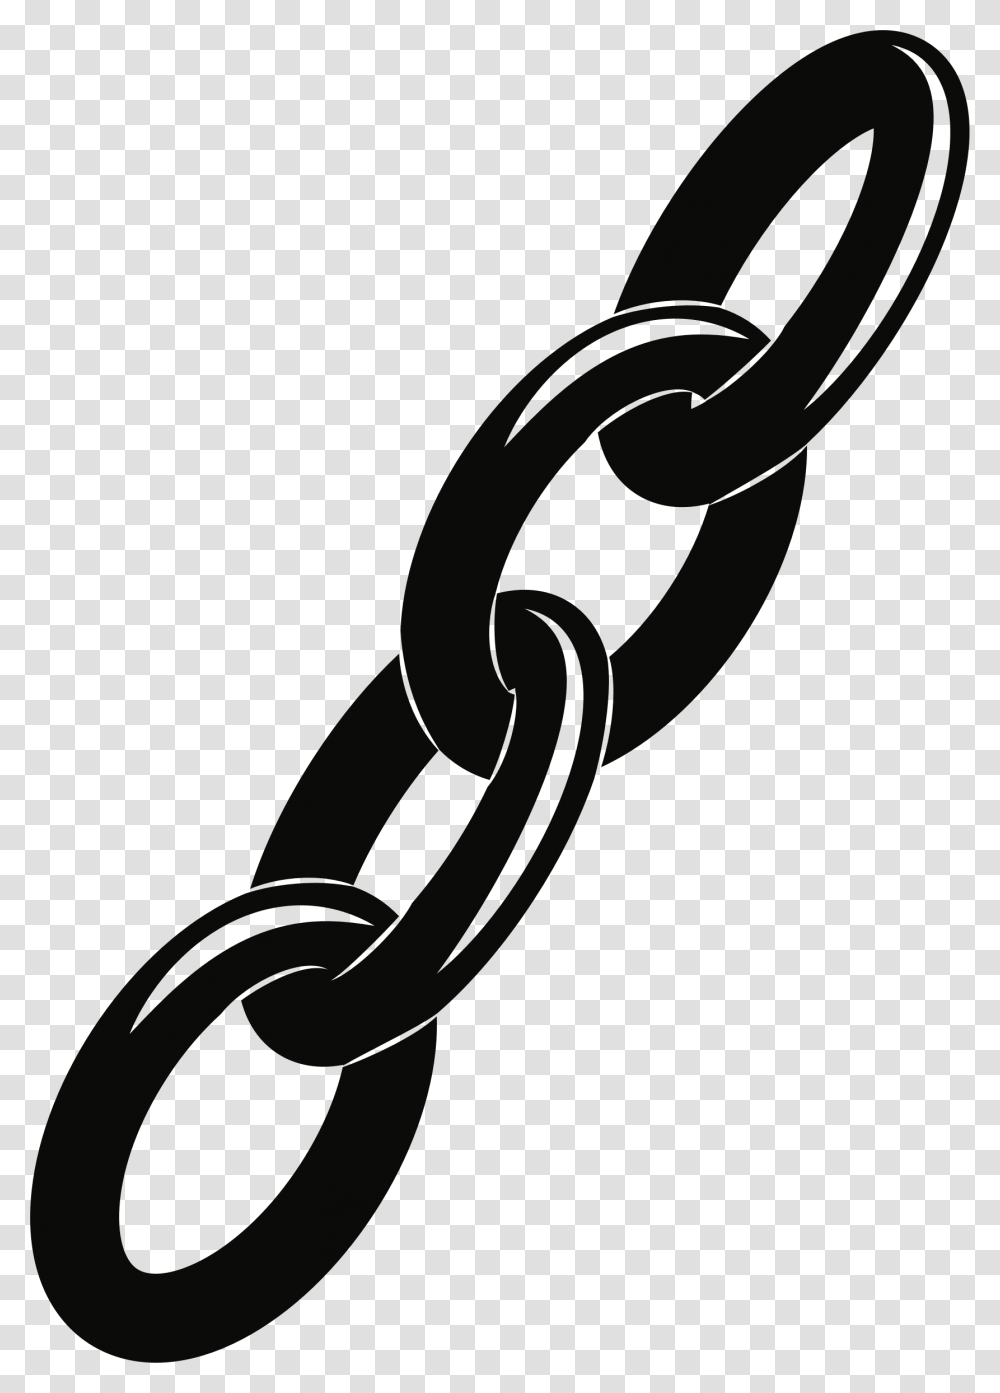 Chain Clipart Clip Art Of Chains Transparent Png